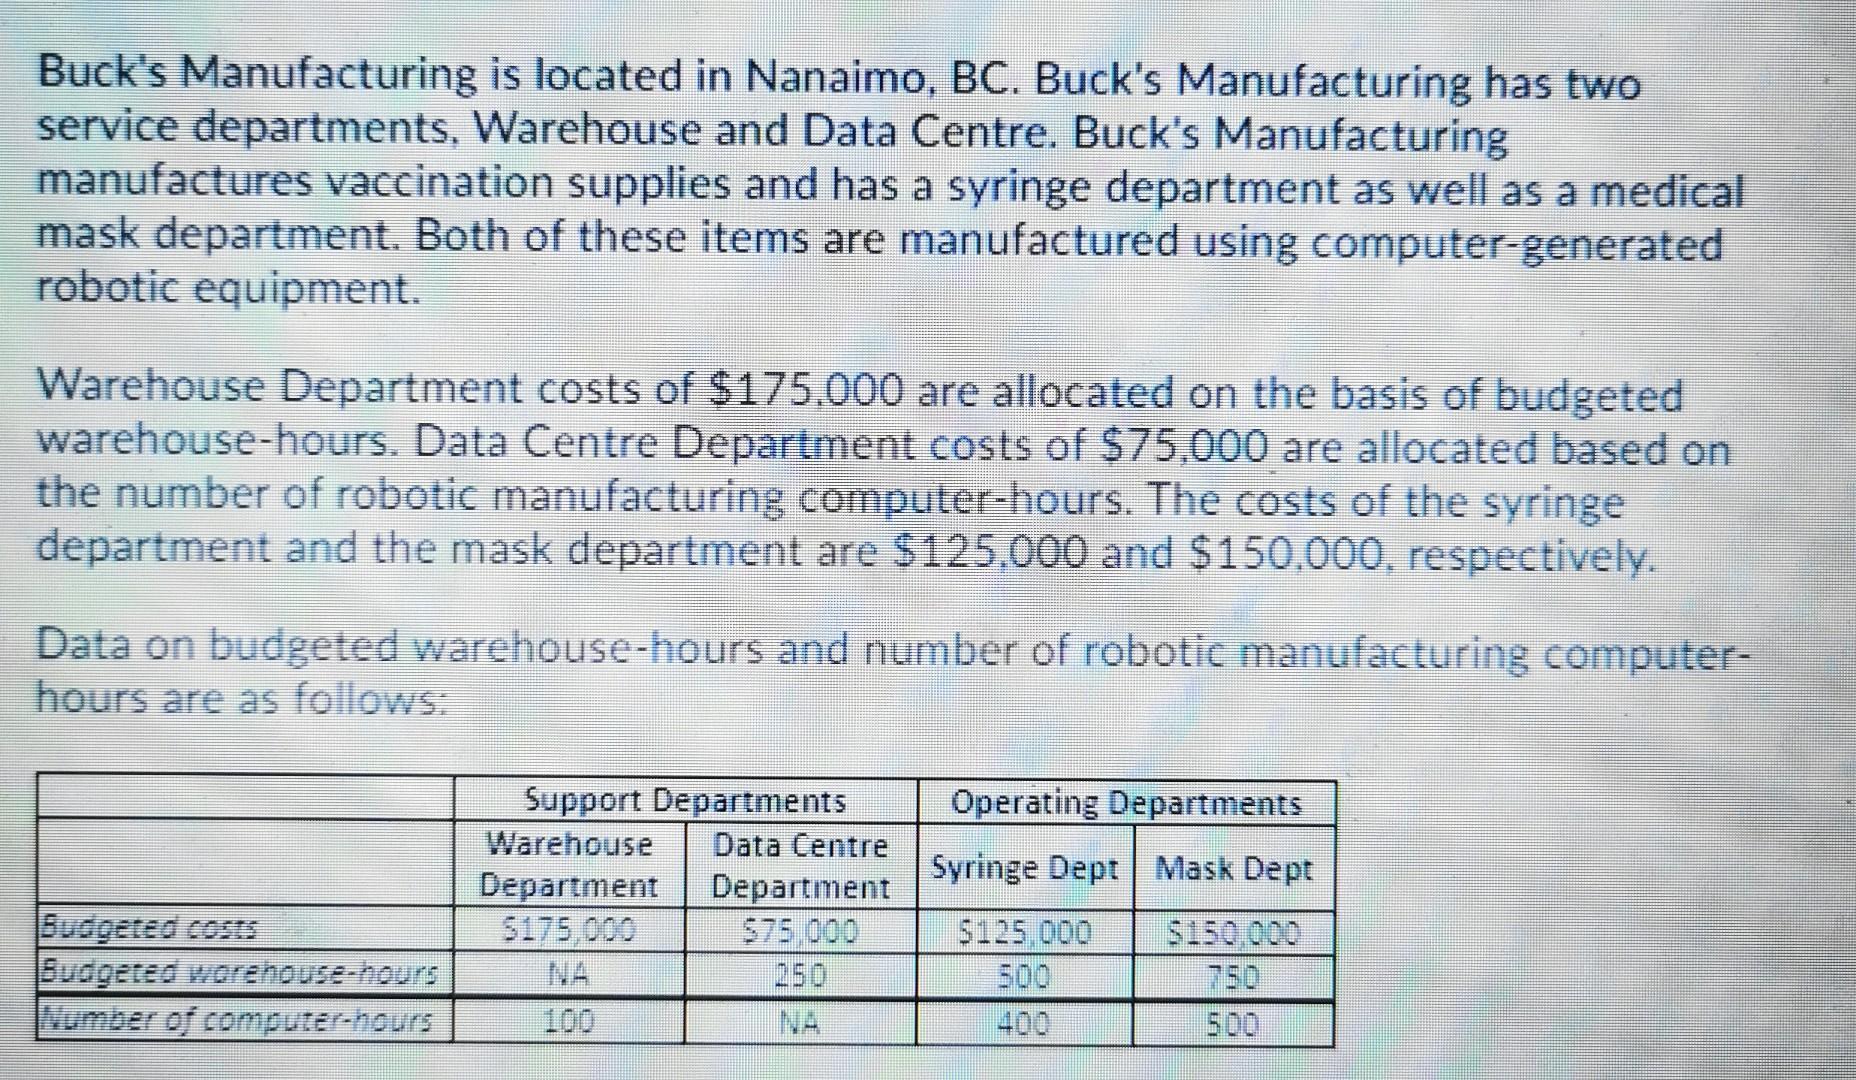 Bucks Manufacturing is located in Nanaimo, BC. Bucks Manufacturing has twoservice departments, Warehouse and Data Centre.